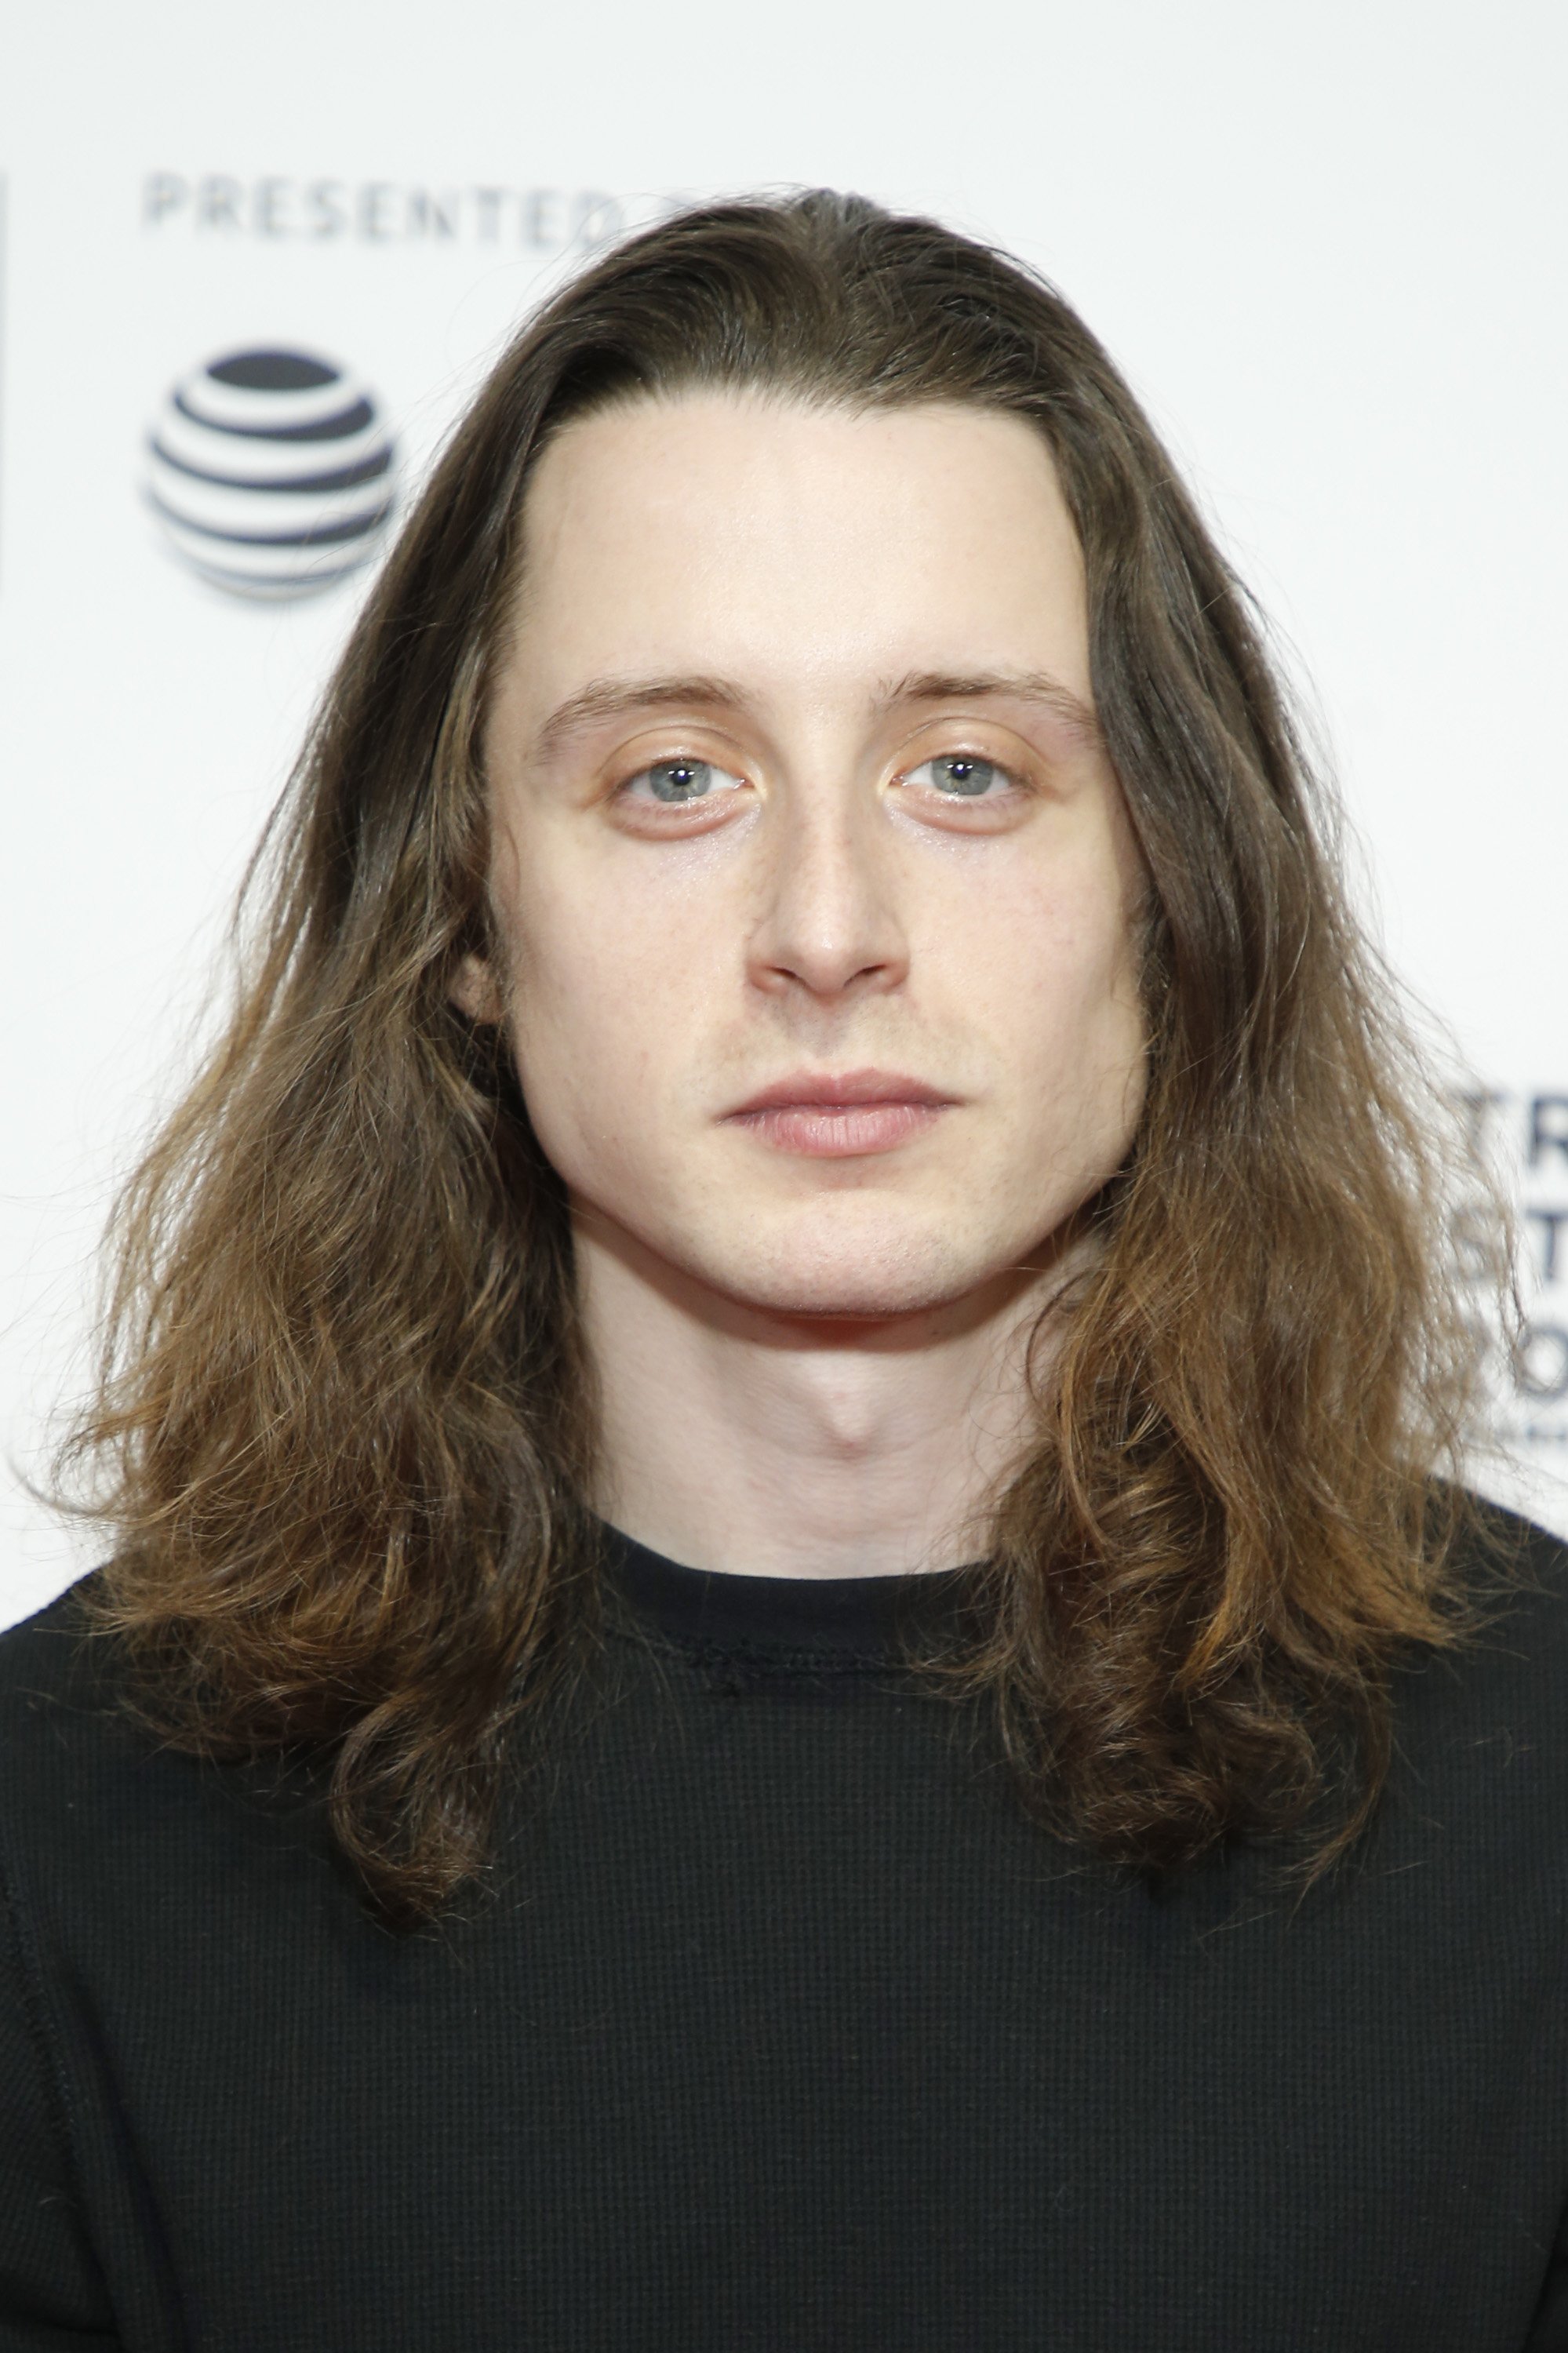  Rory Culkin attends the “Materna" premiere during the 2021 Tribeca Festival on June 17, 2021 in New York City. | Source: Getty Images